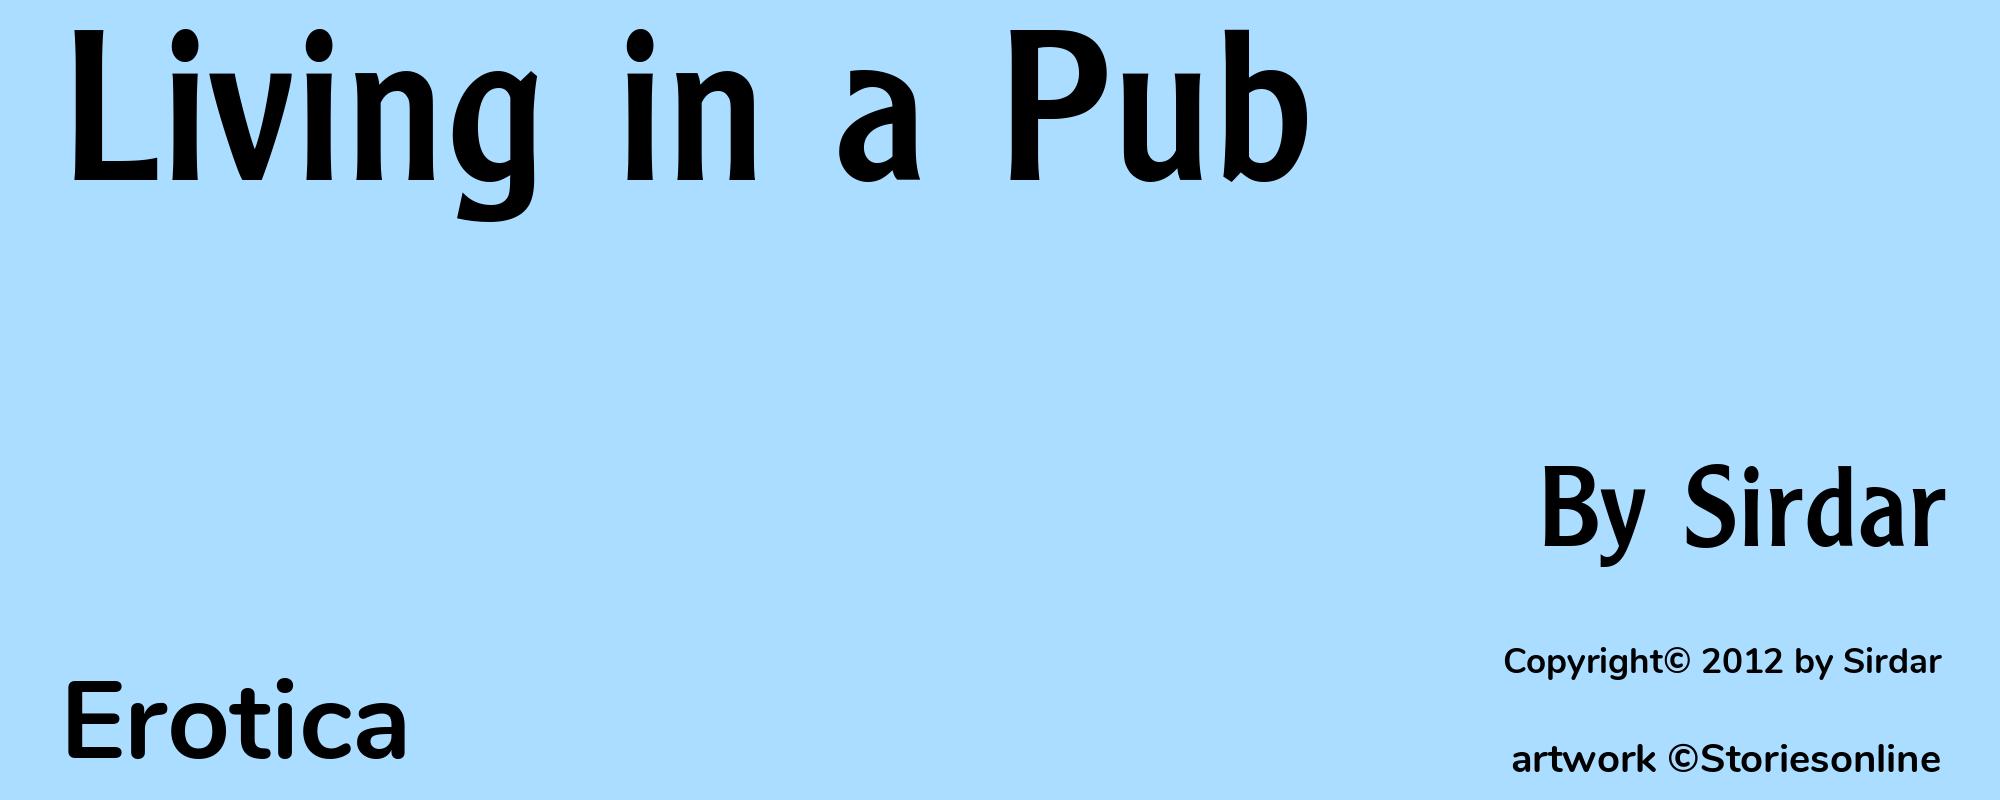 Living in a Pub - Cover